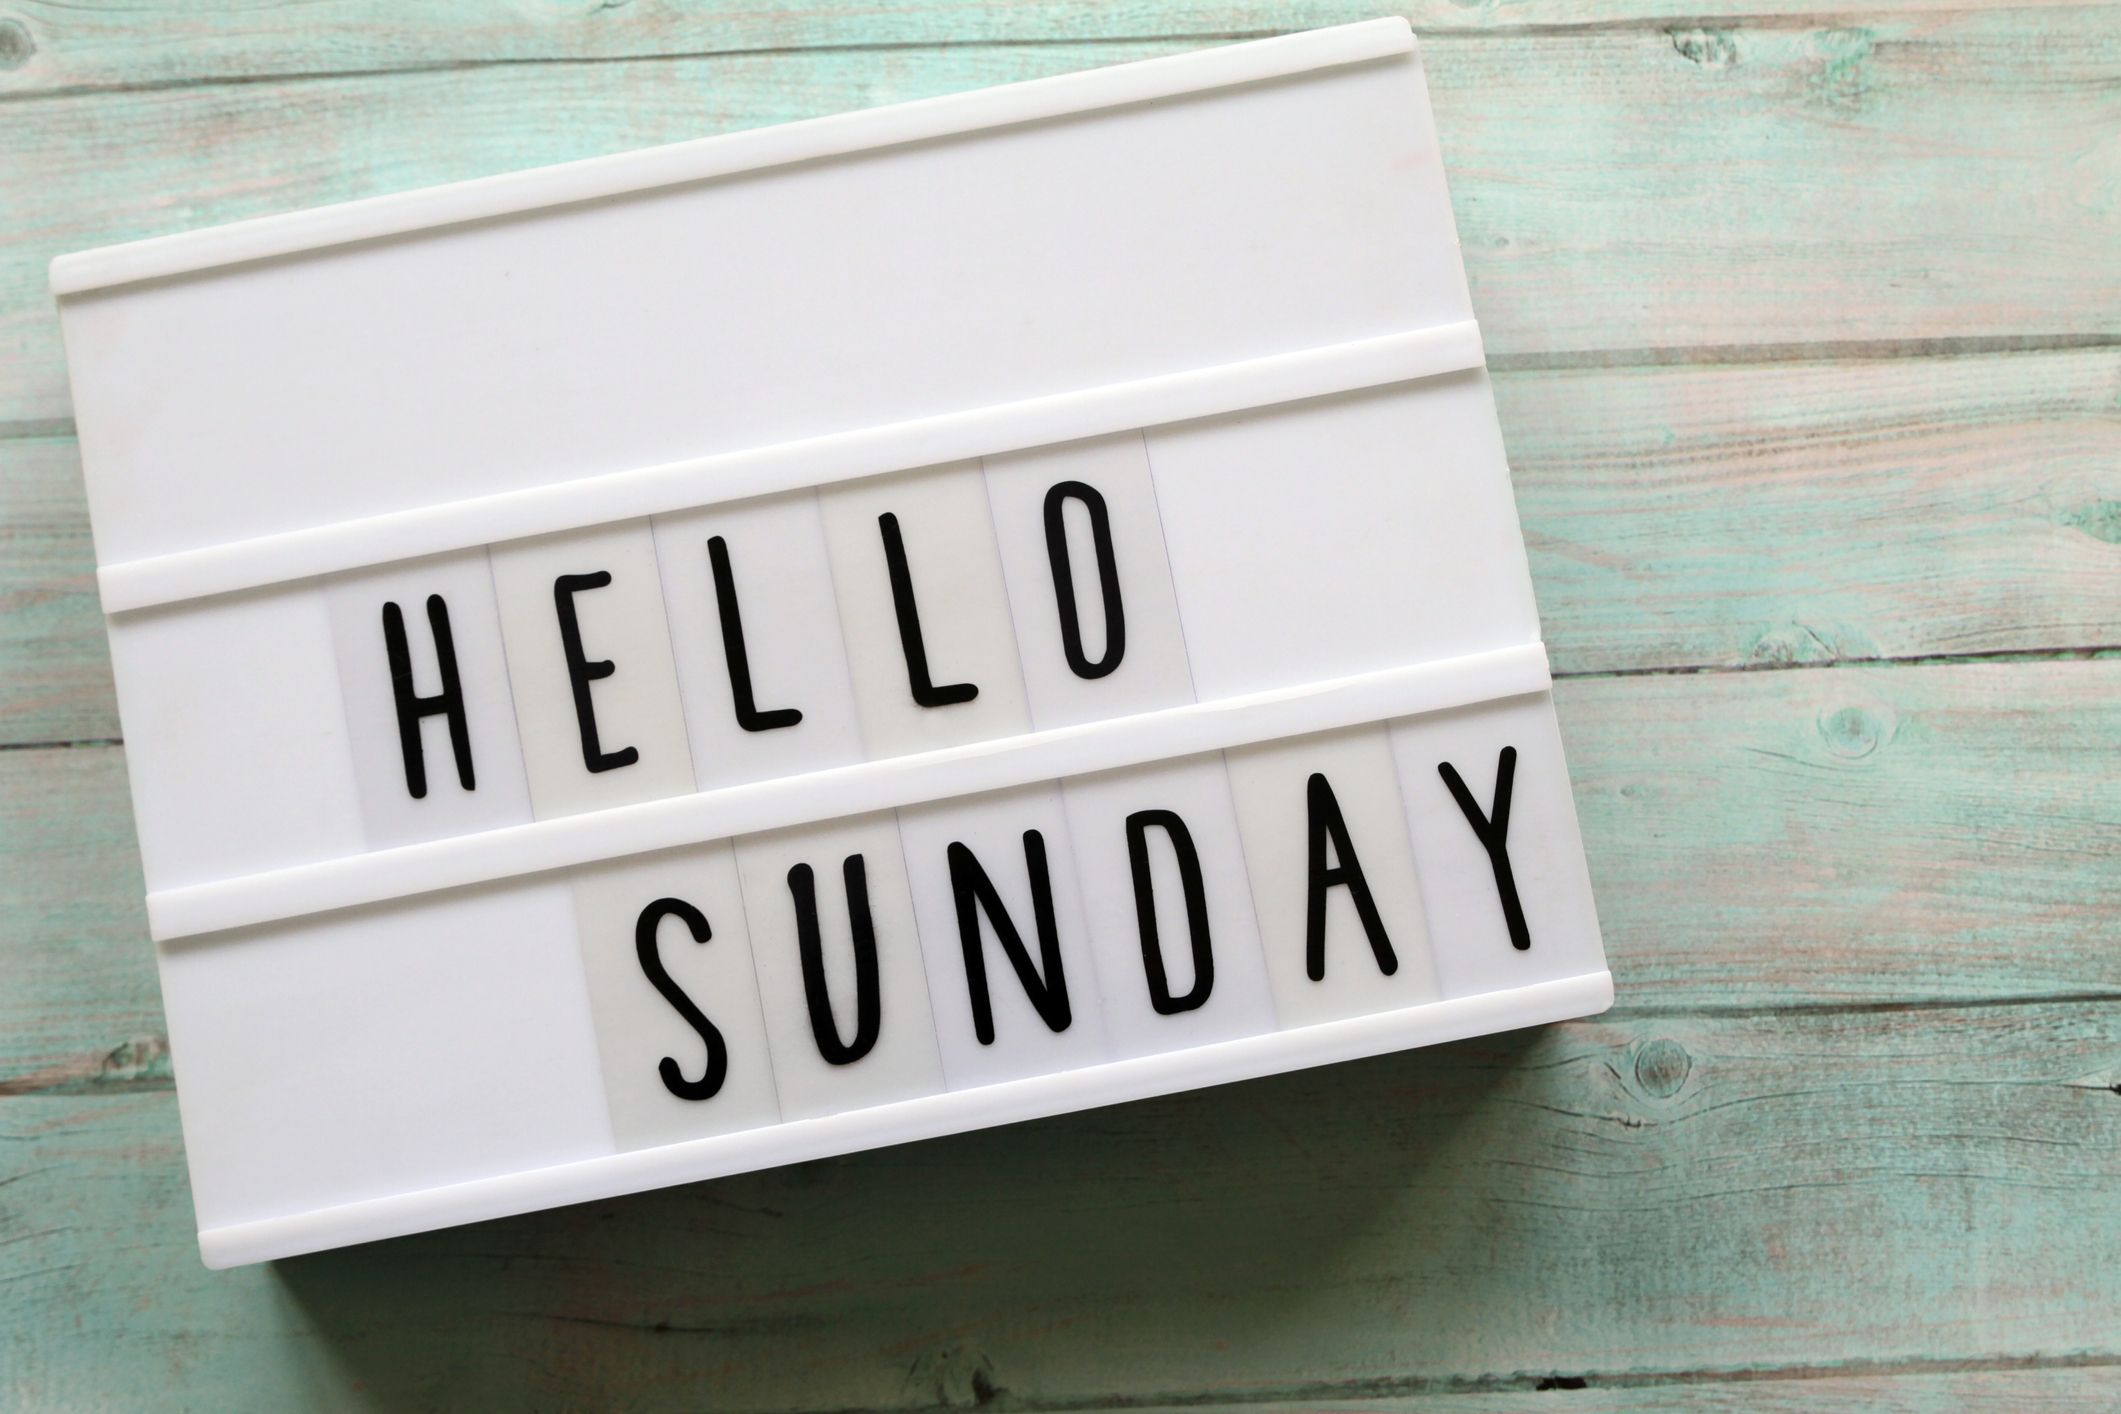 20 Best Sunday Quotes - Inspiring Sunday Sayings and Quotes